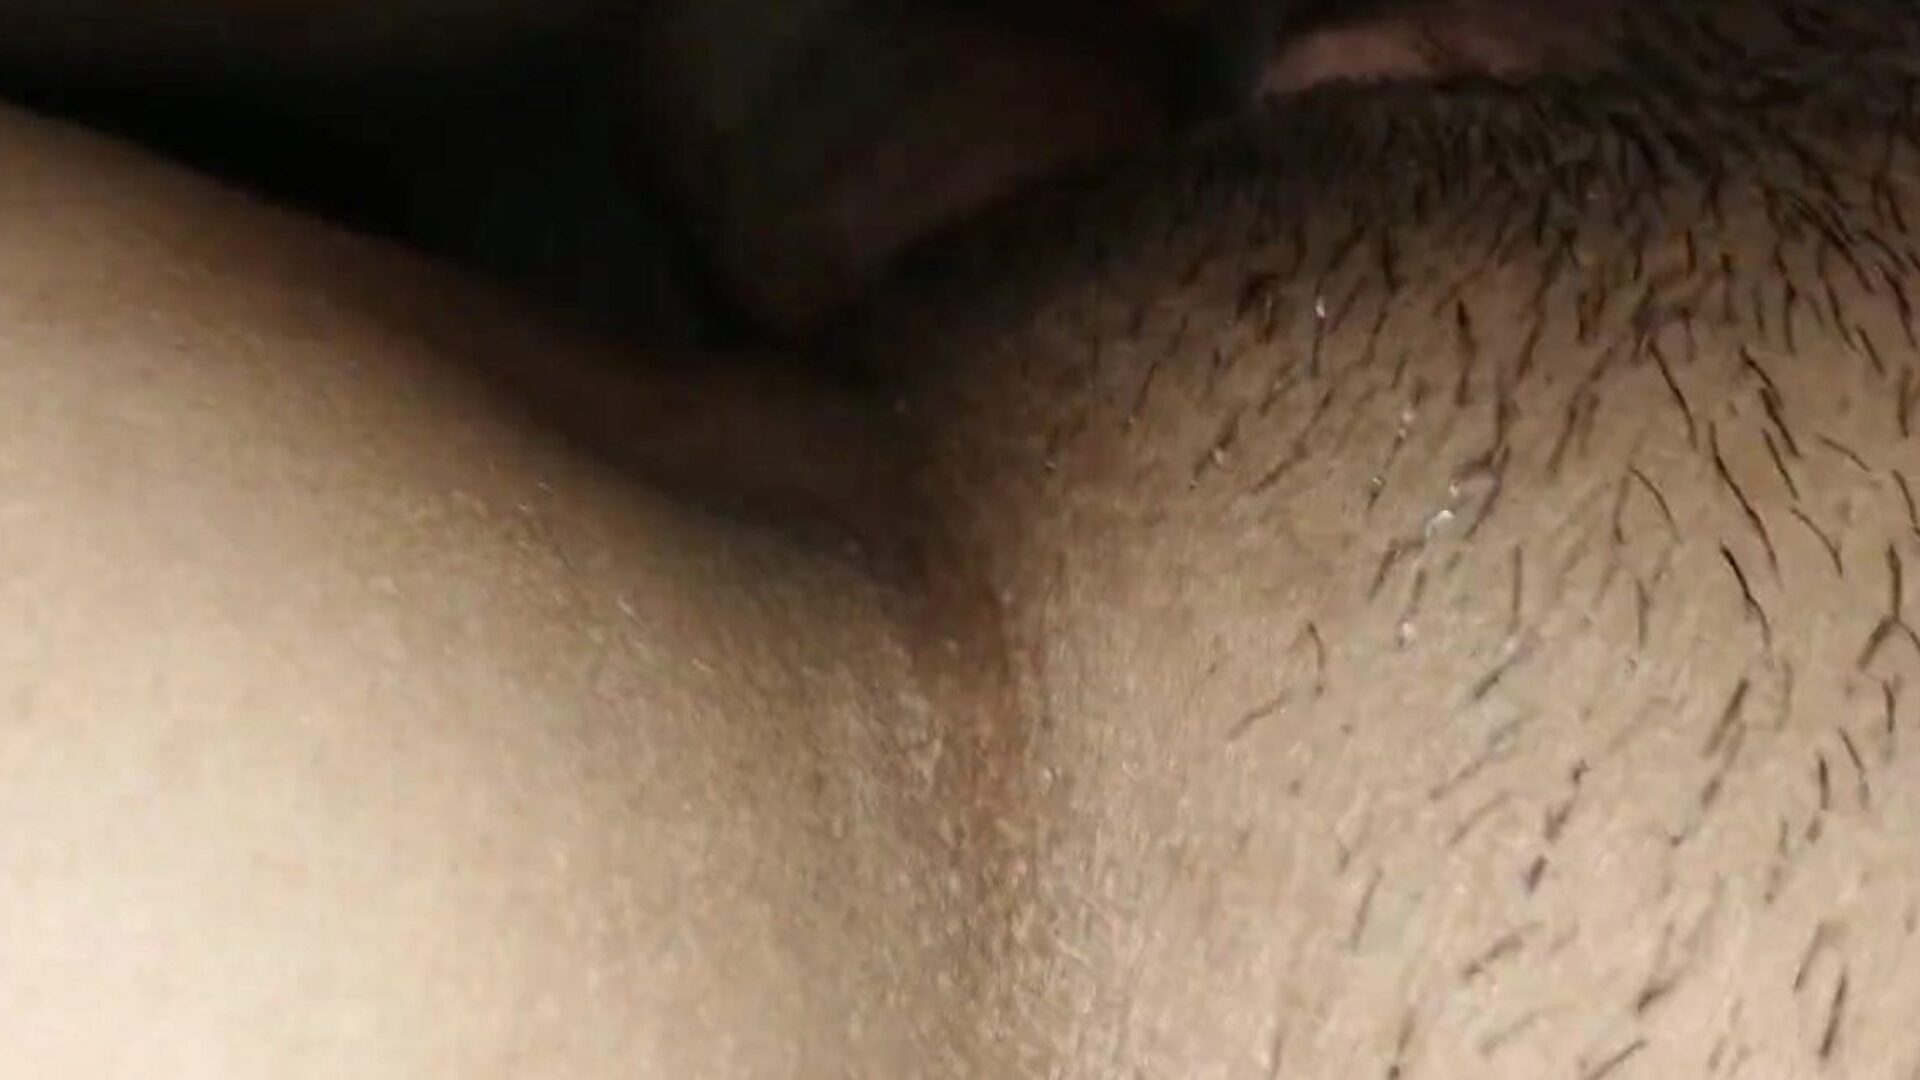 close up my pussy pussy, free gf pussy hd porn 41: xhamster watch close up my wife pussy episode on xhamster, the best hd fuckfest tube site with tonnes of free malaysian asian & gf pussy porn vids